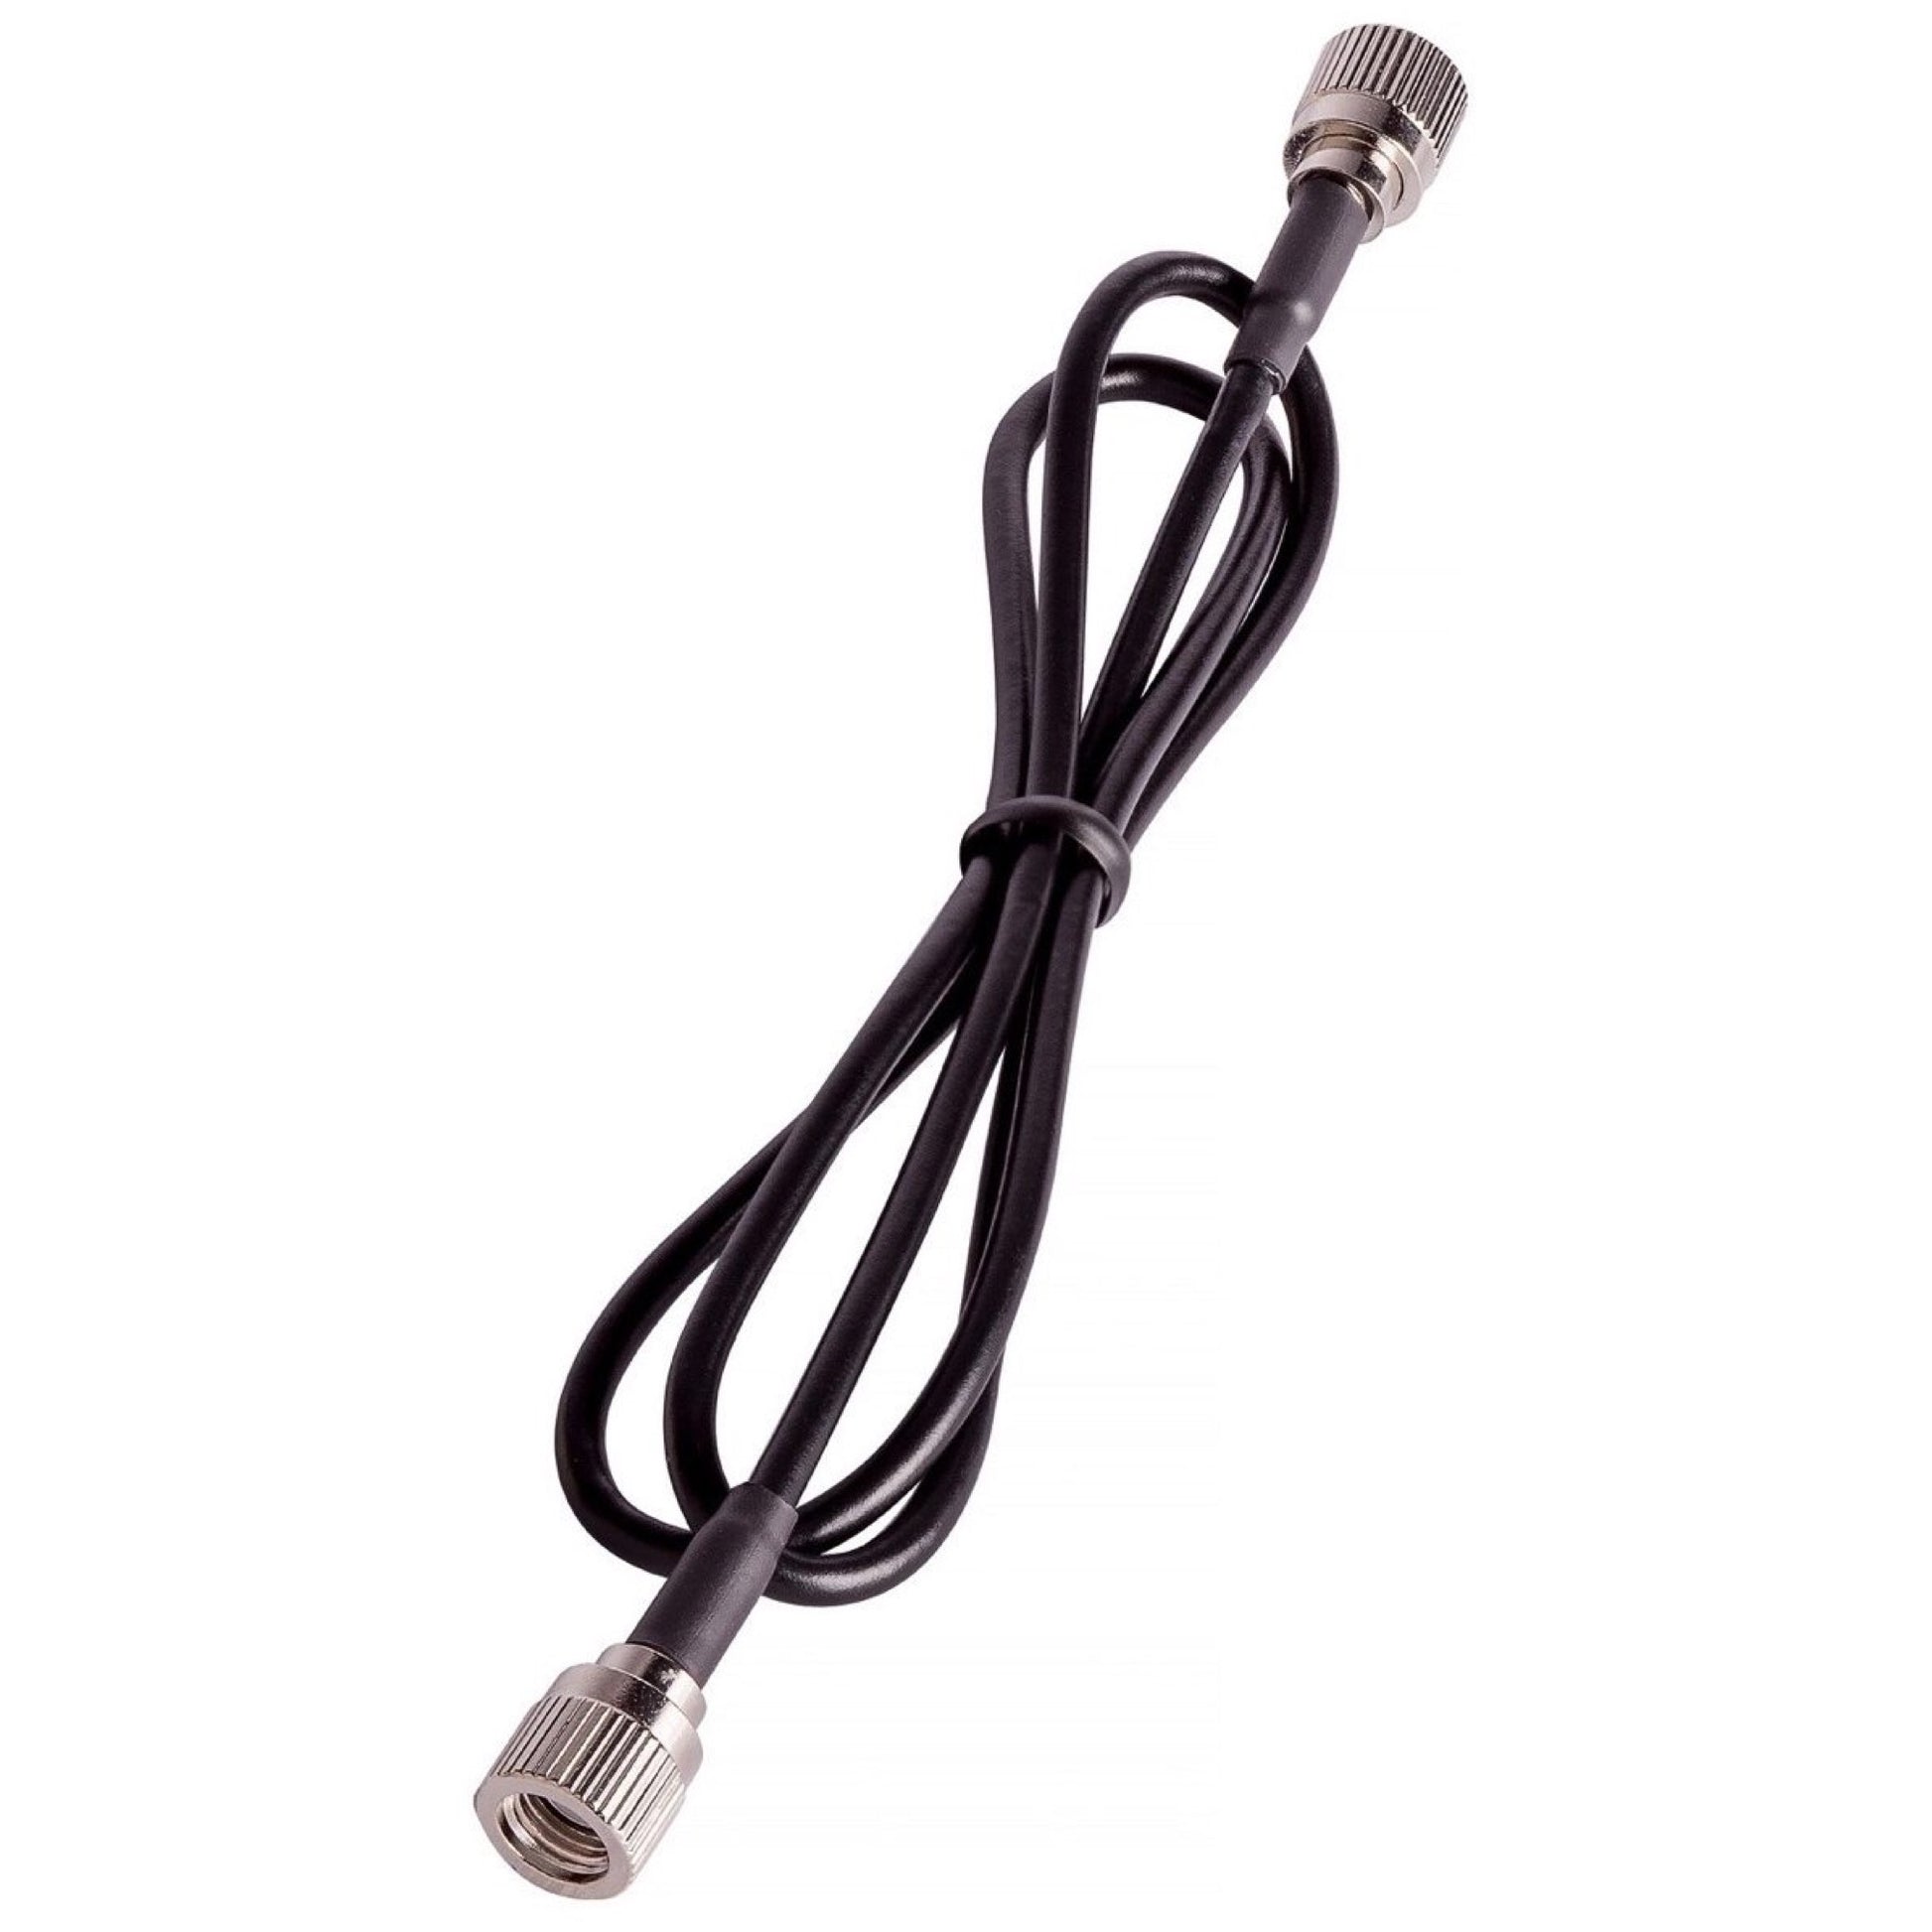 Shure Reverse SMA Cable for GLX-D Advanced Digital Wireless Systems, UA806-RSMA, 6-Foot